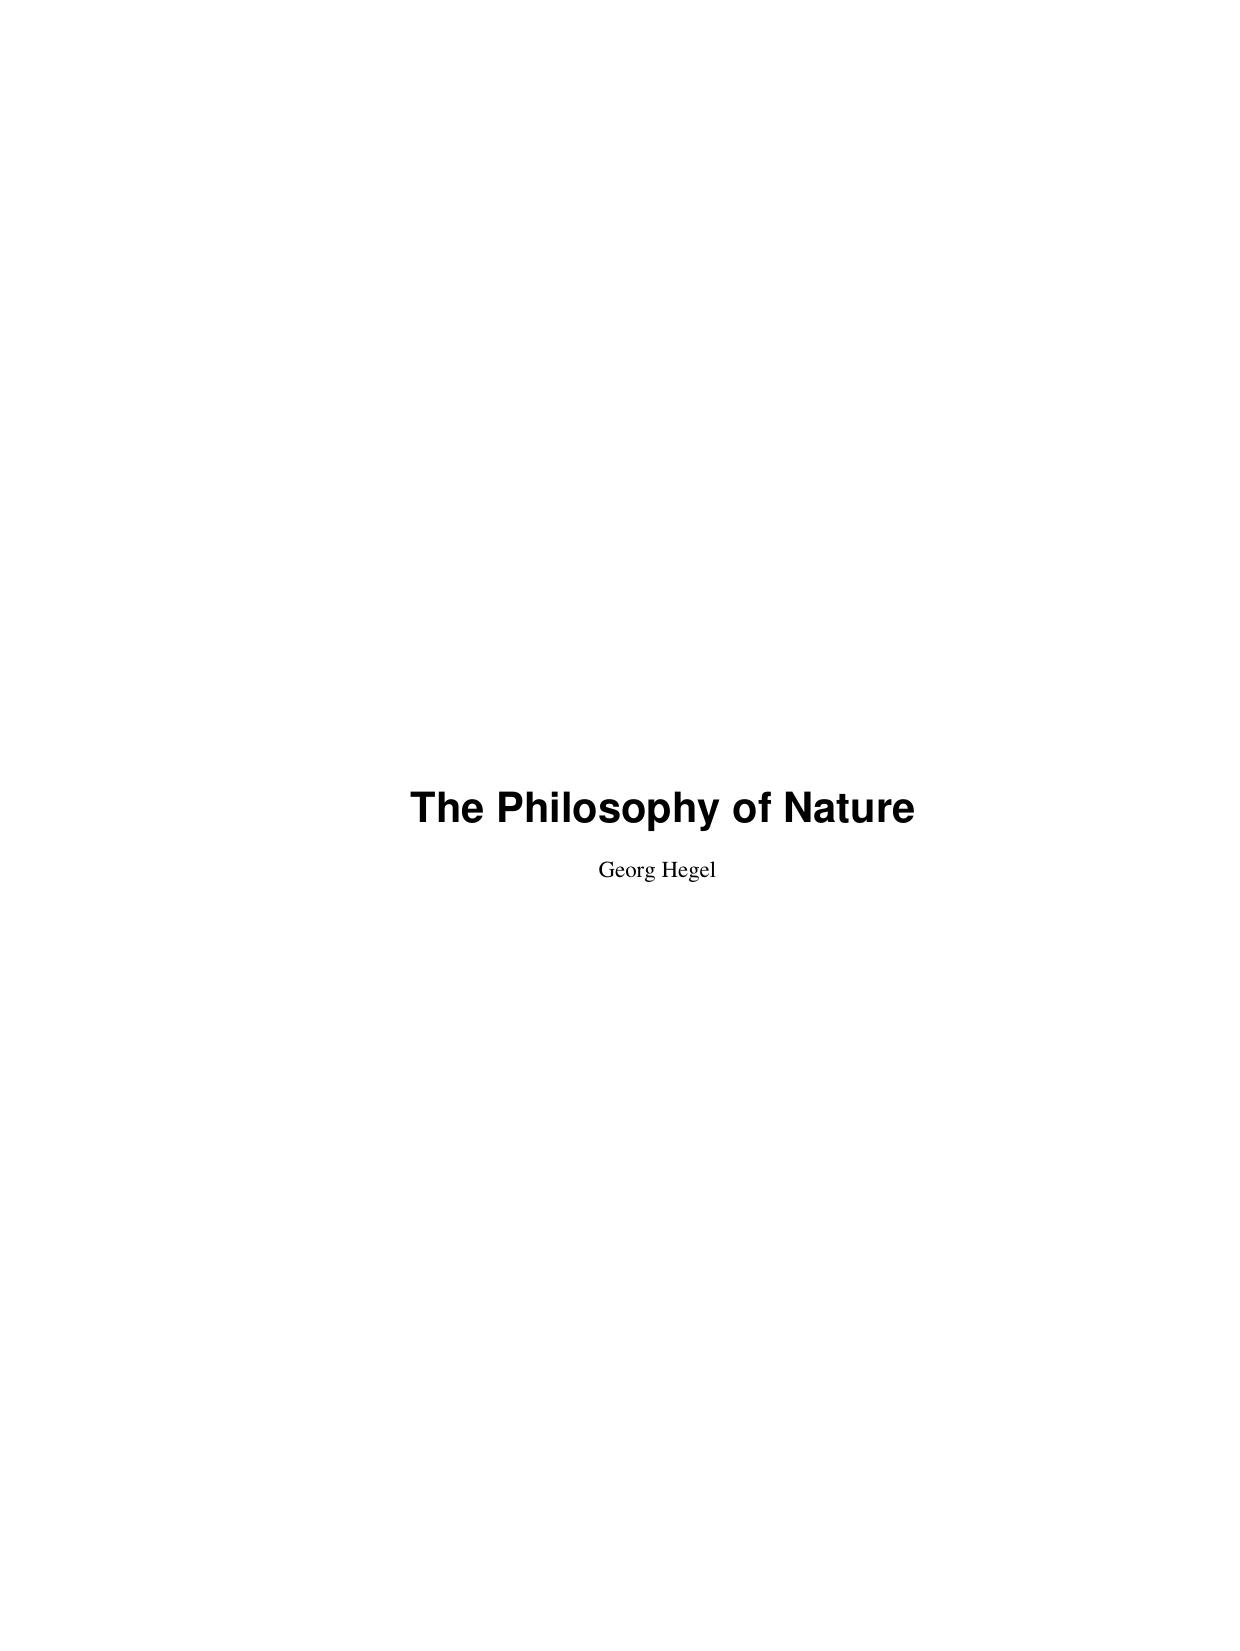 The Philosophy of Nature - Paper